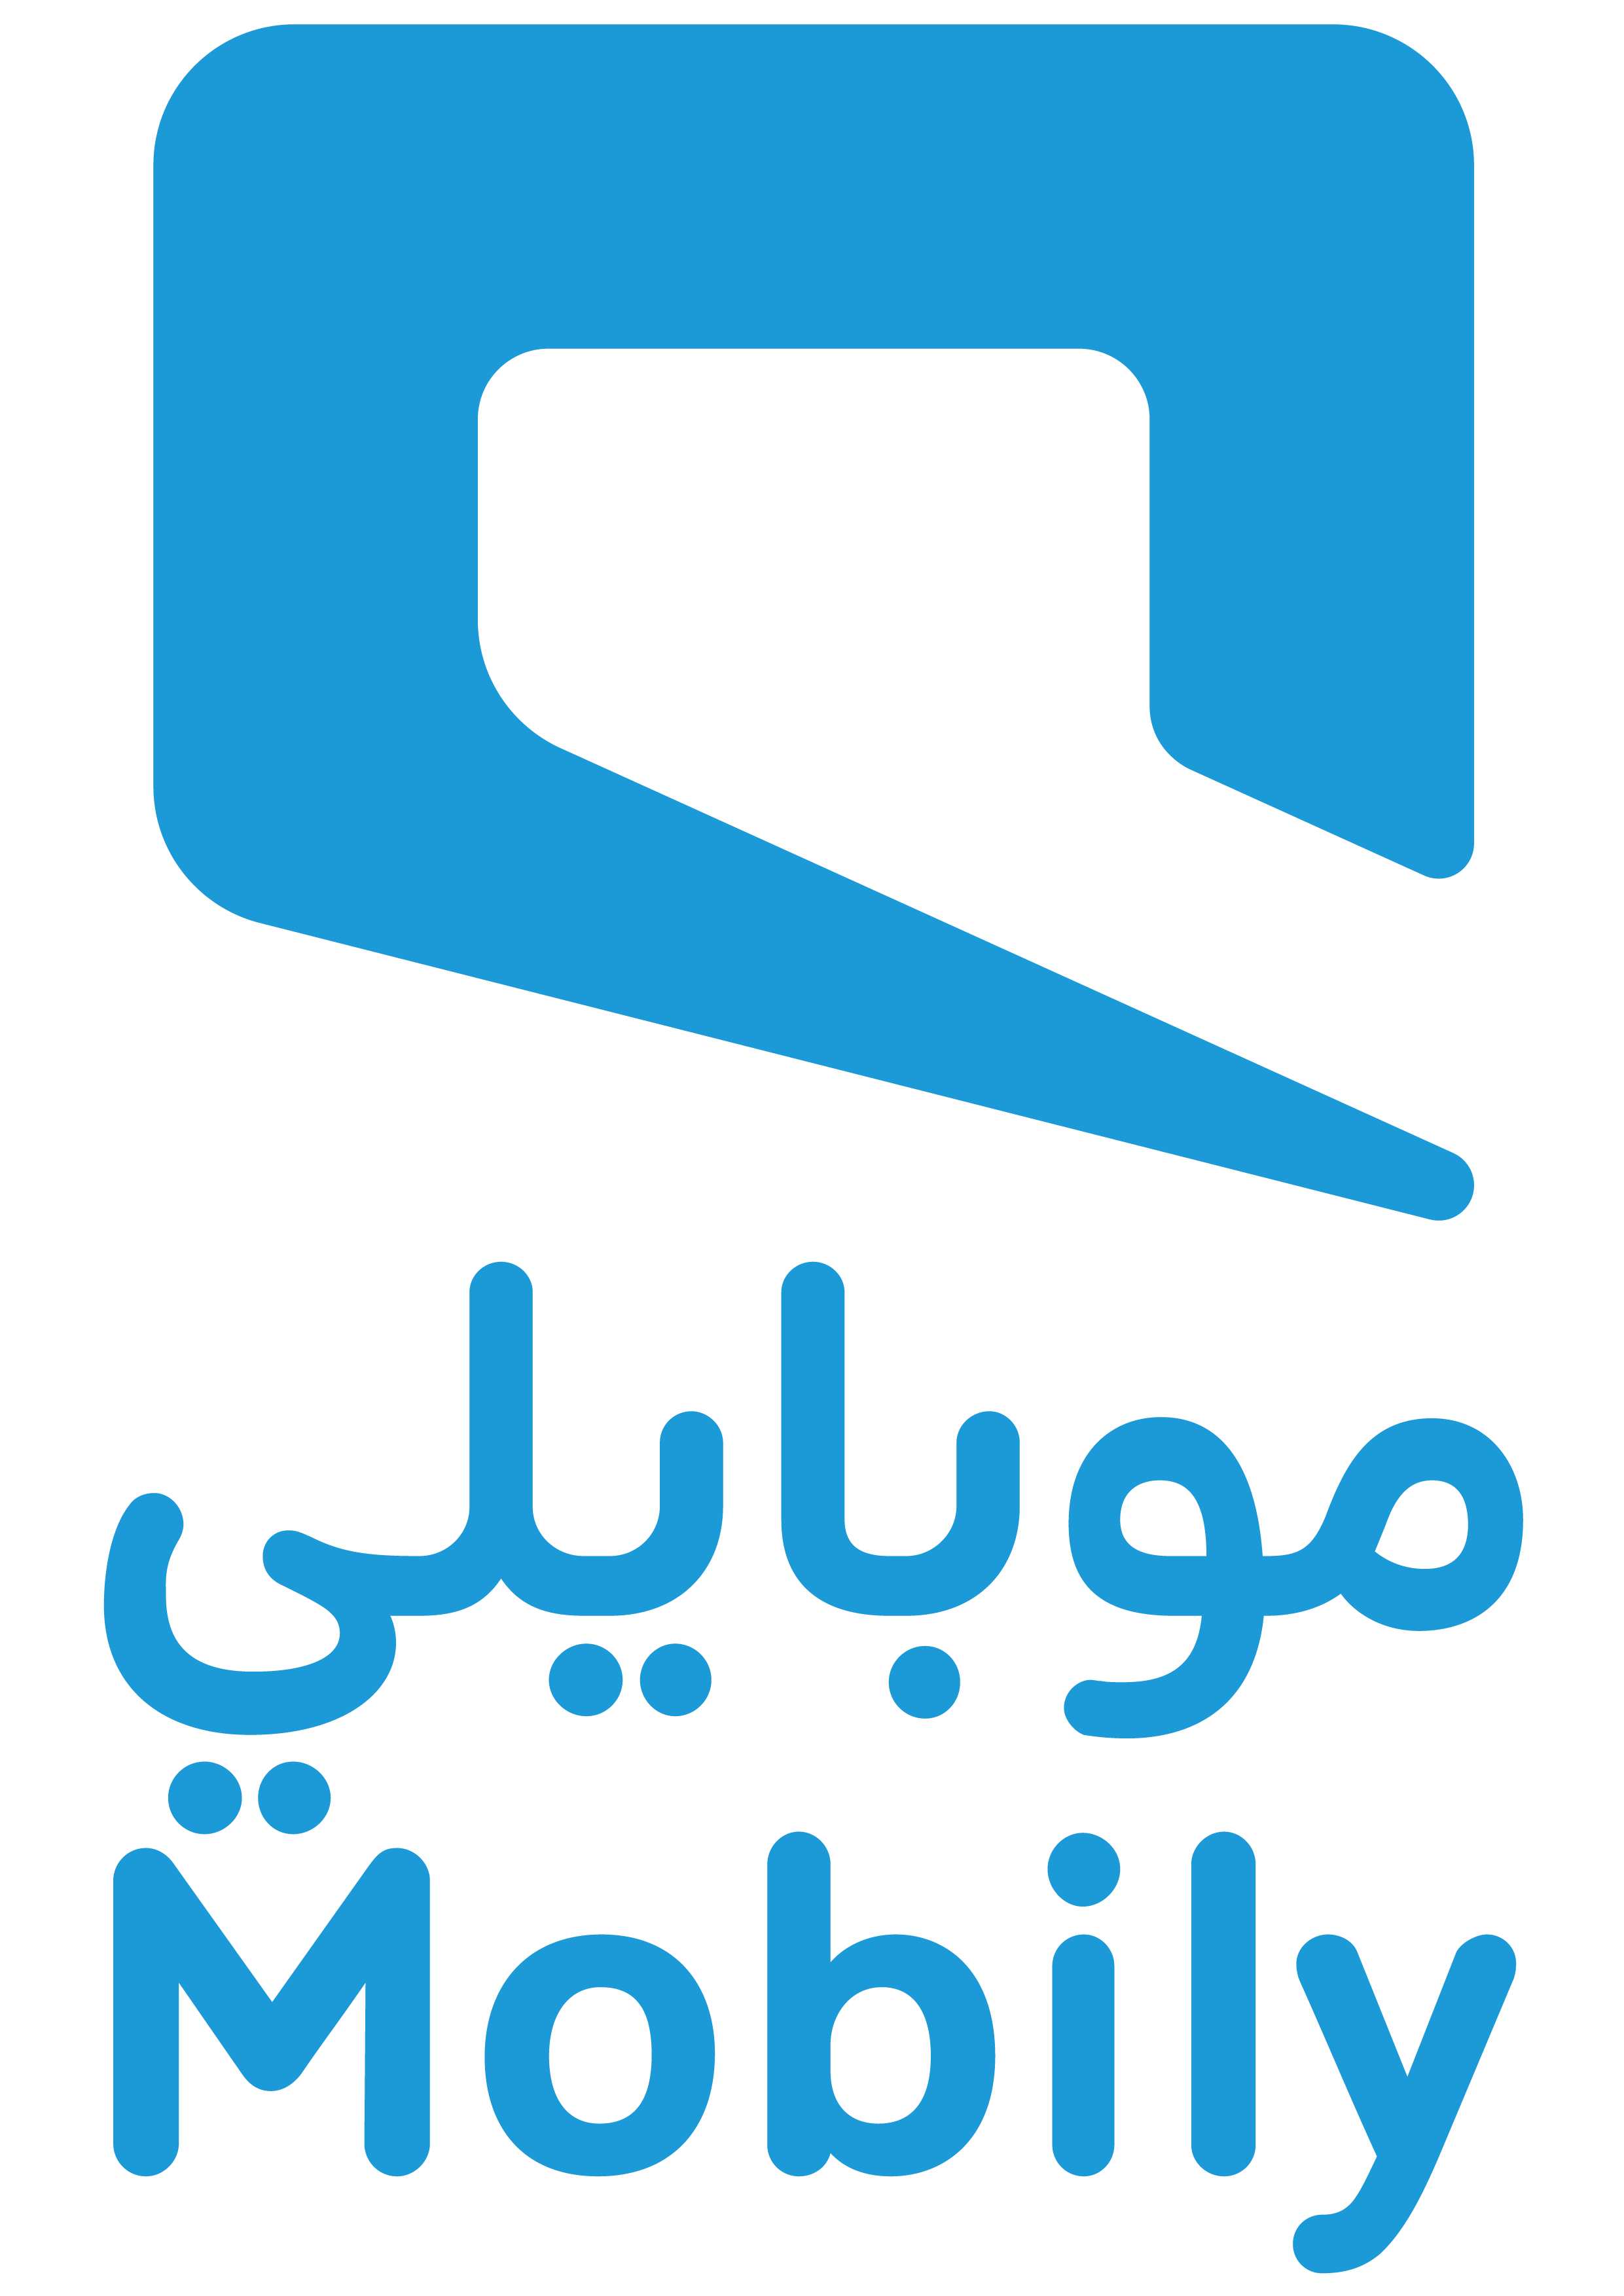 Mobily Logo - Mobily | Mobily and the Child Welfare Association have Enabled Women ...